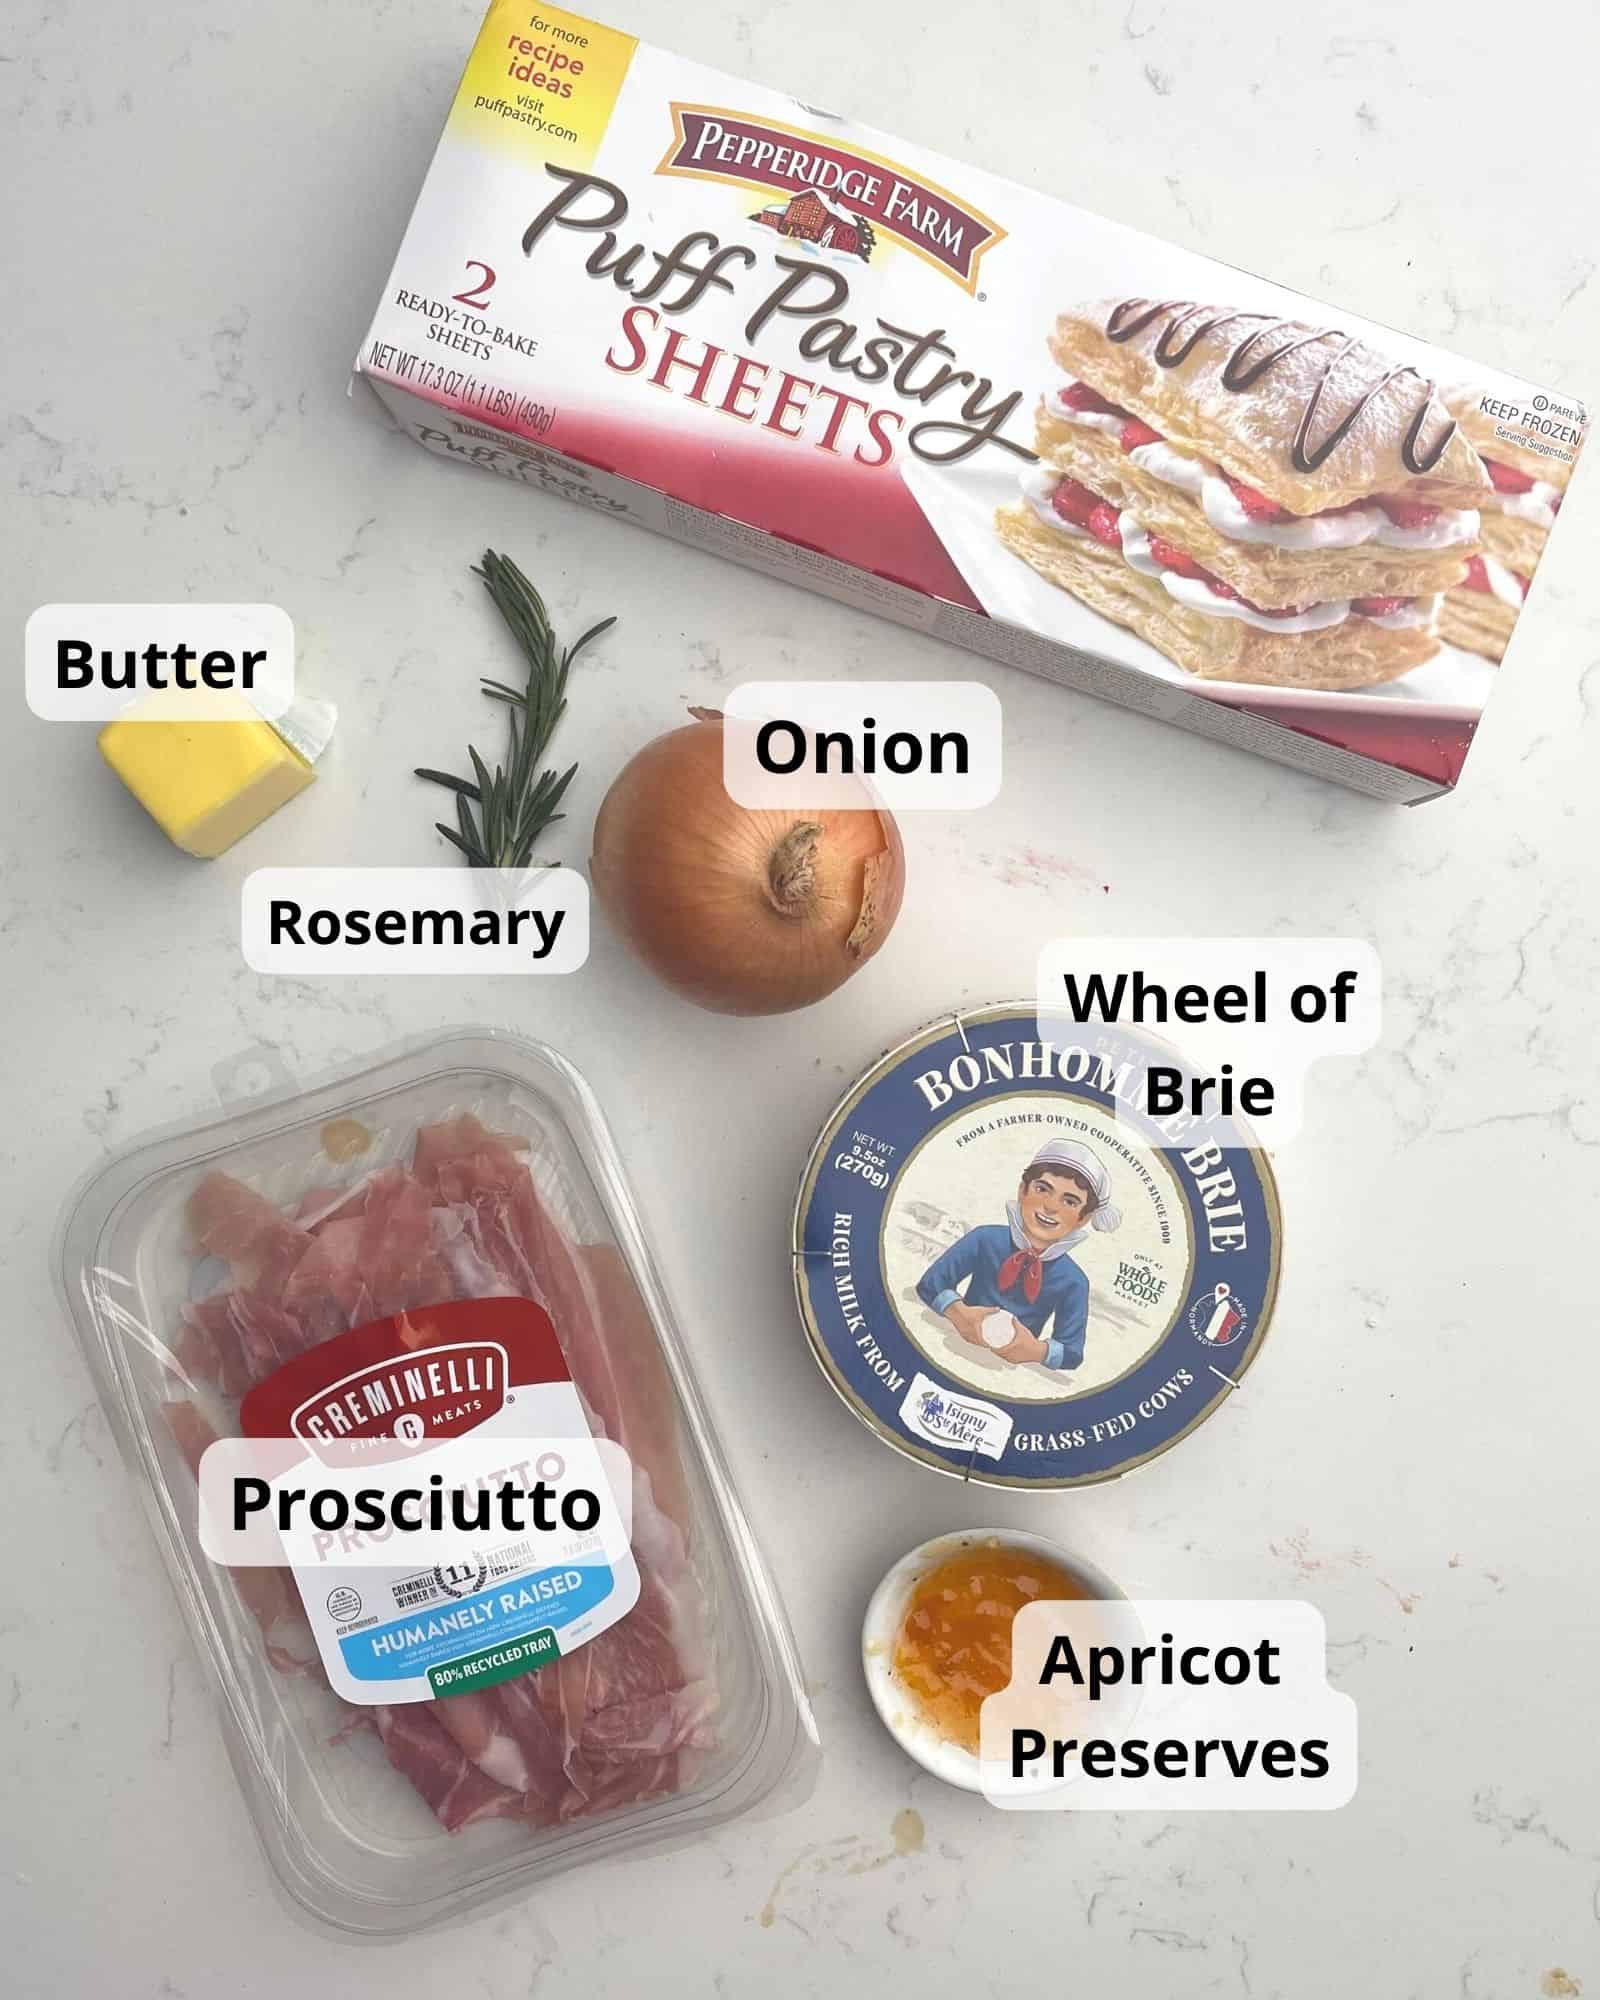 ingredients to baked brie in puff pastry - puff pastry, wheel of brie, apricot preserves, prosciutto, onion, rosemary, and butter.